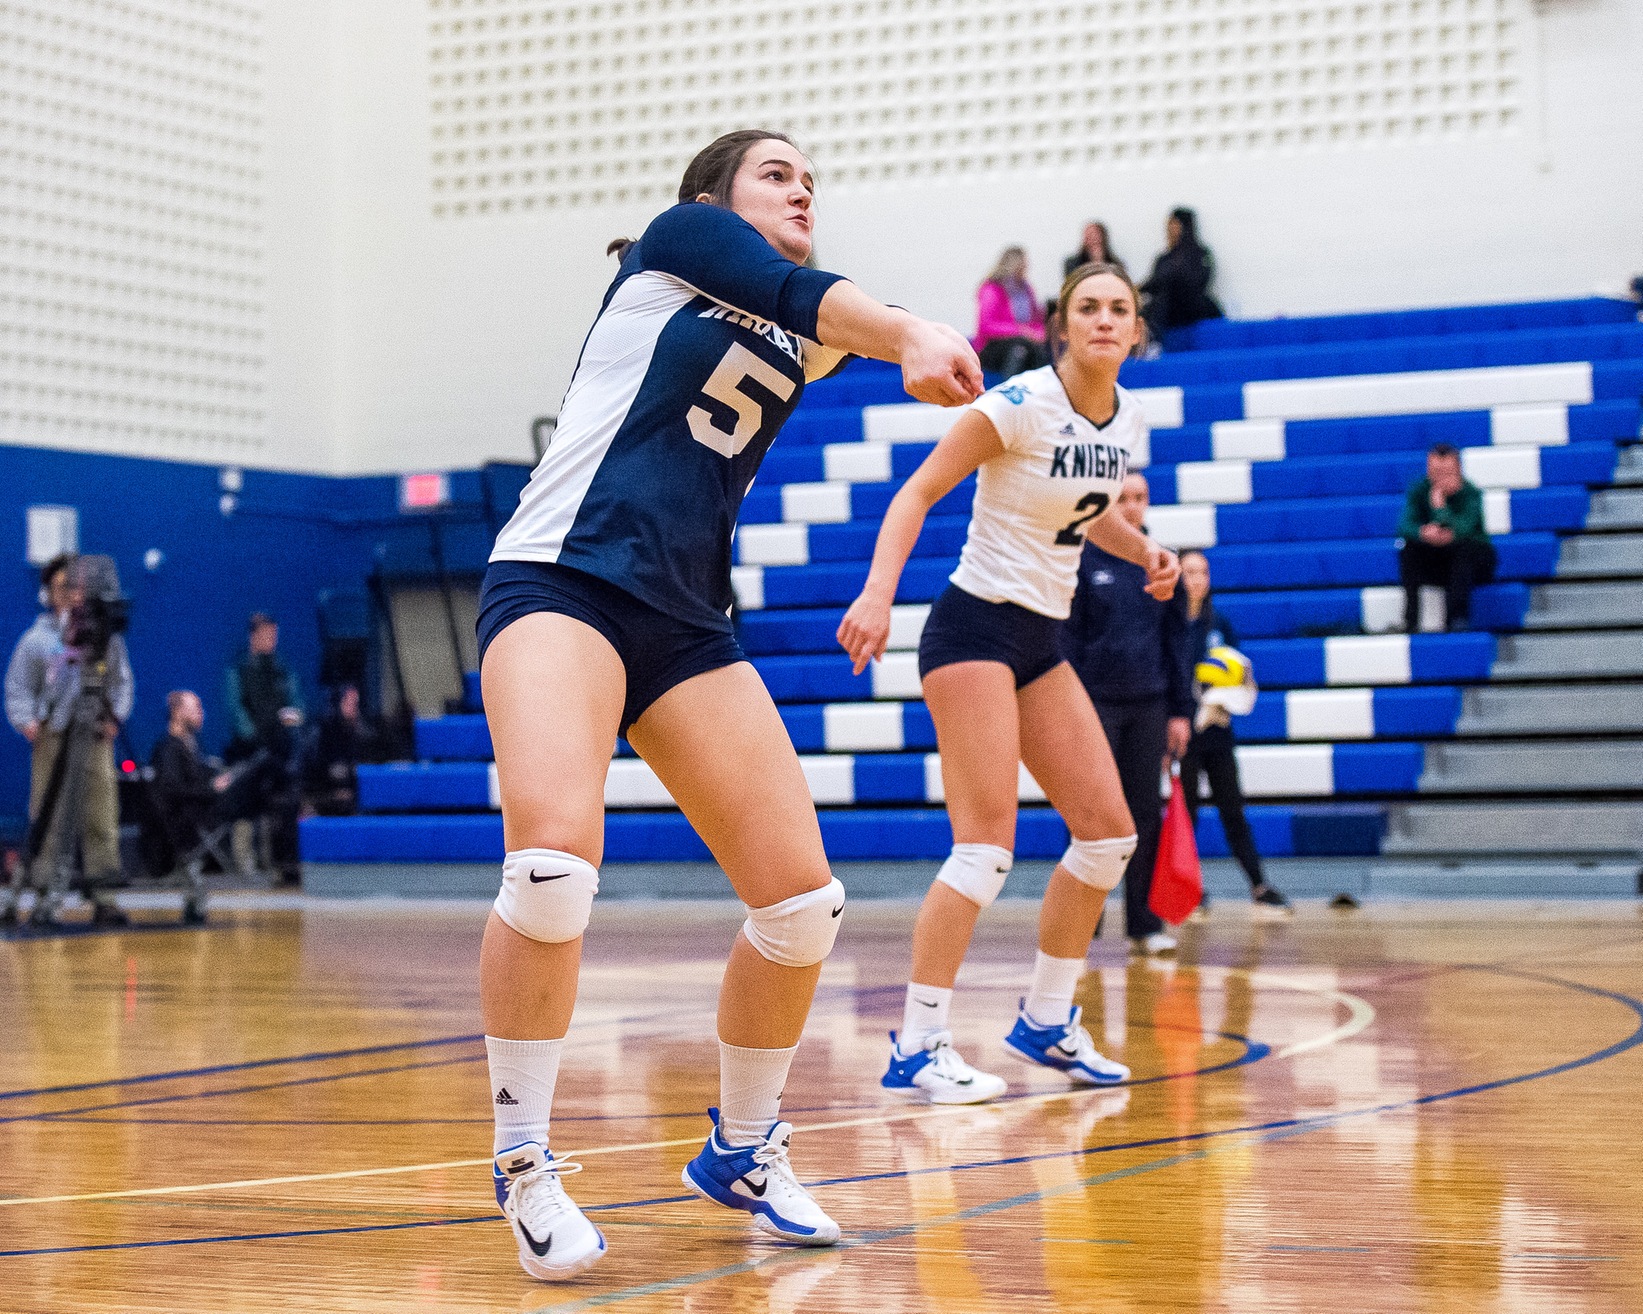 PREVIEW: Knights look for 4th consecutive victory in annual Volleyball Grad Game